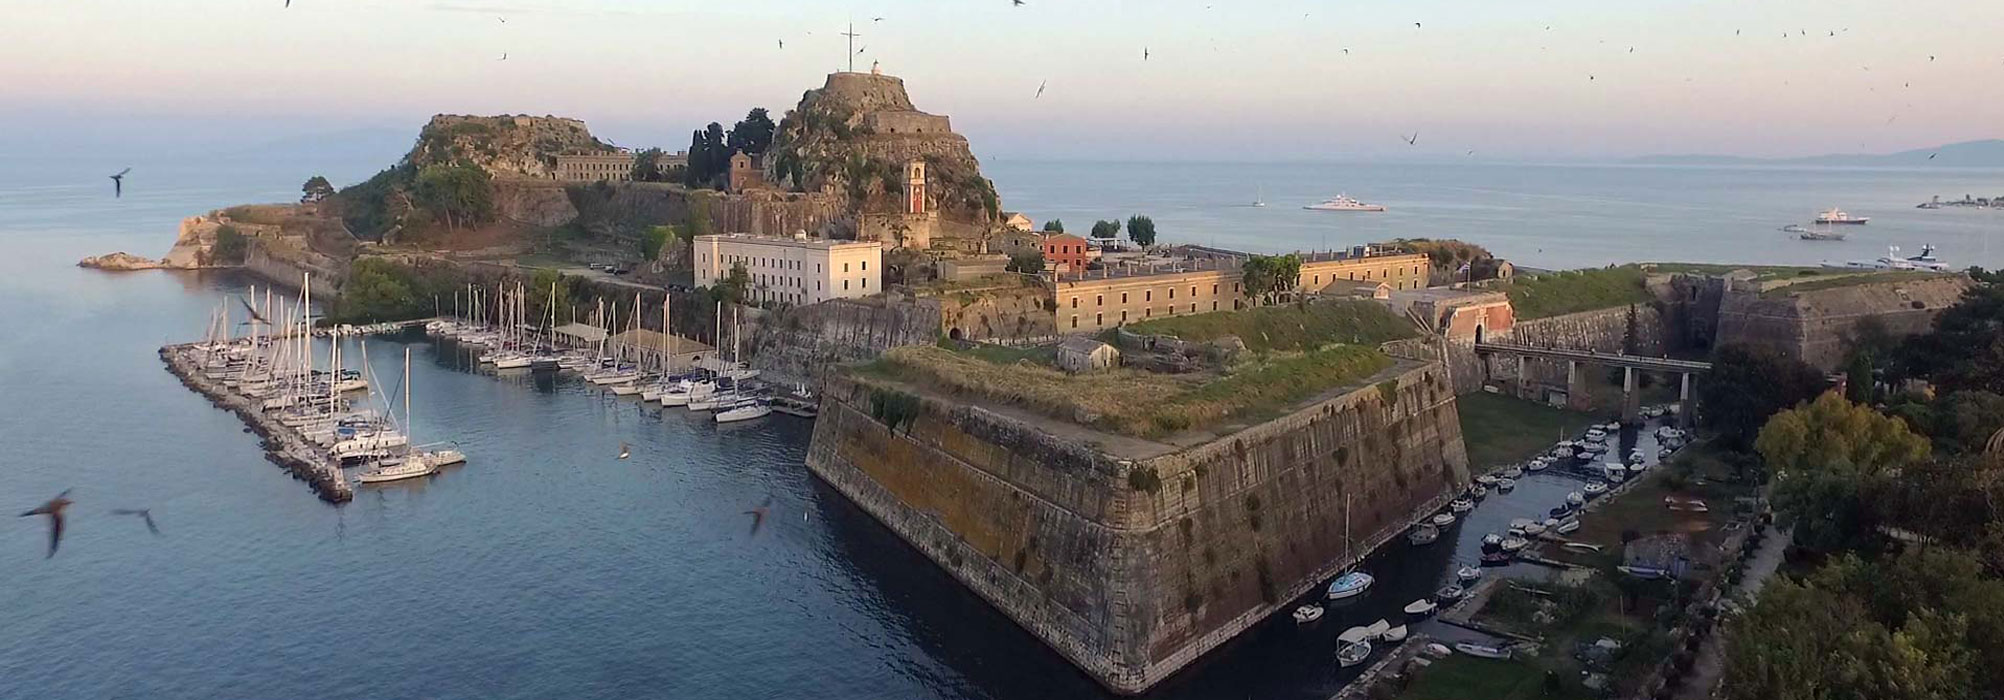 The Amazing Old Fortress in Corfu